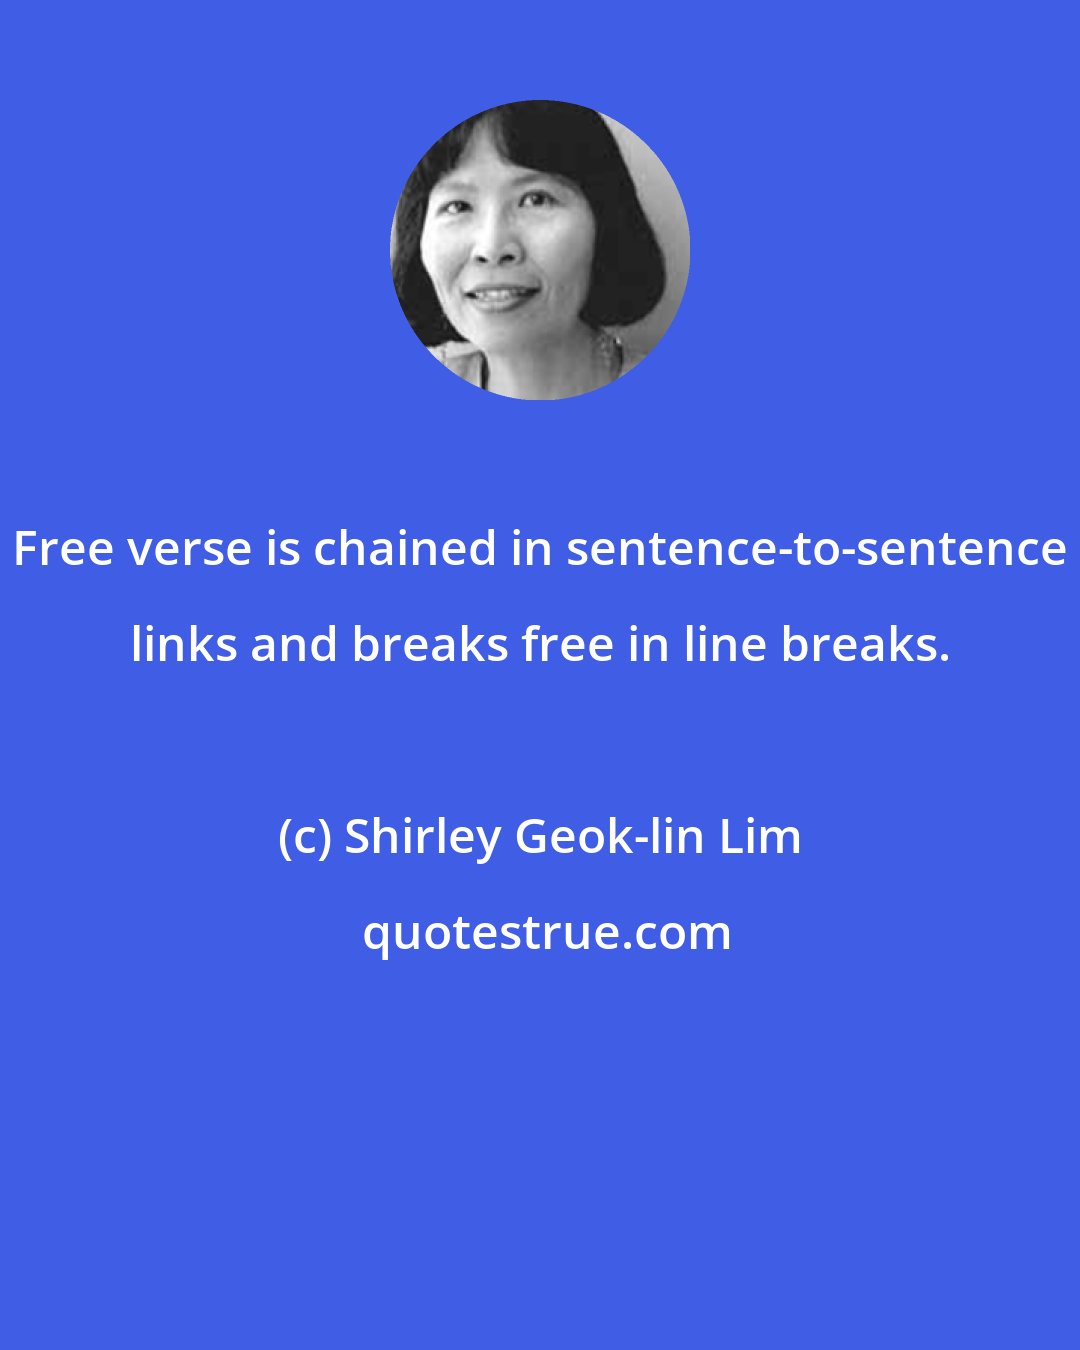 Shirley Geok-lin Lim: Free verse is chained in sentence-to-sentence links and breaks free in line breaks.